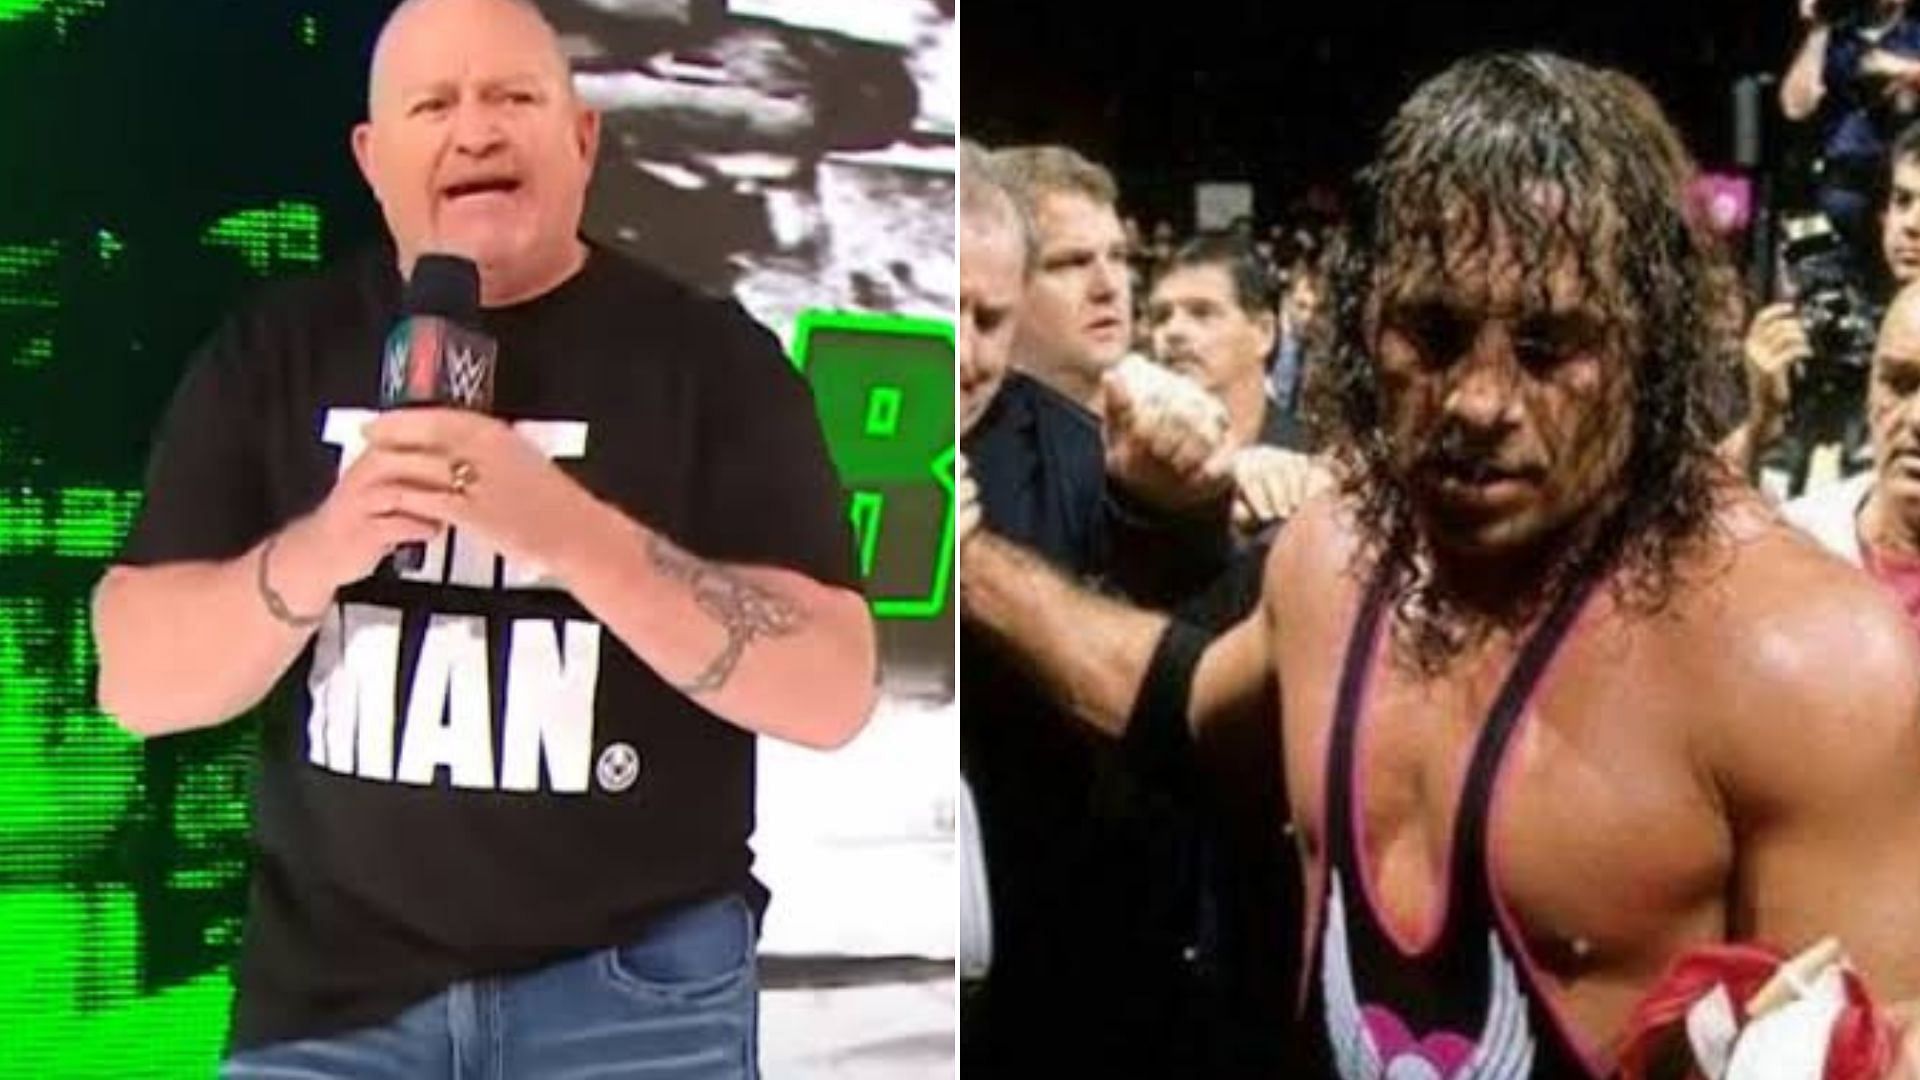 Road Dogg made some controversial comments about Bret Hart.